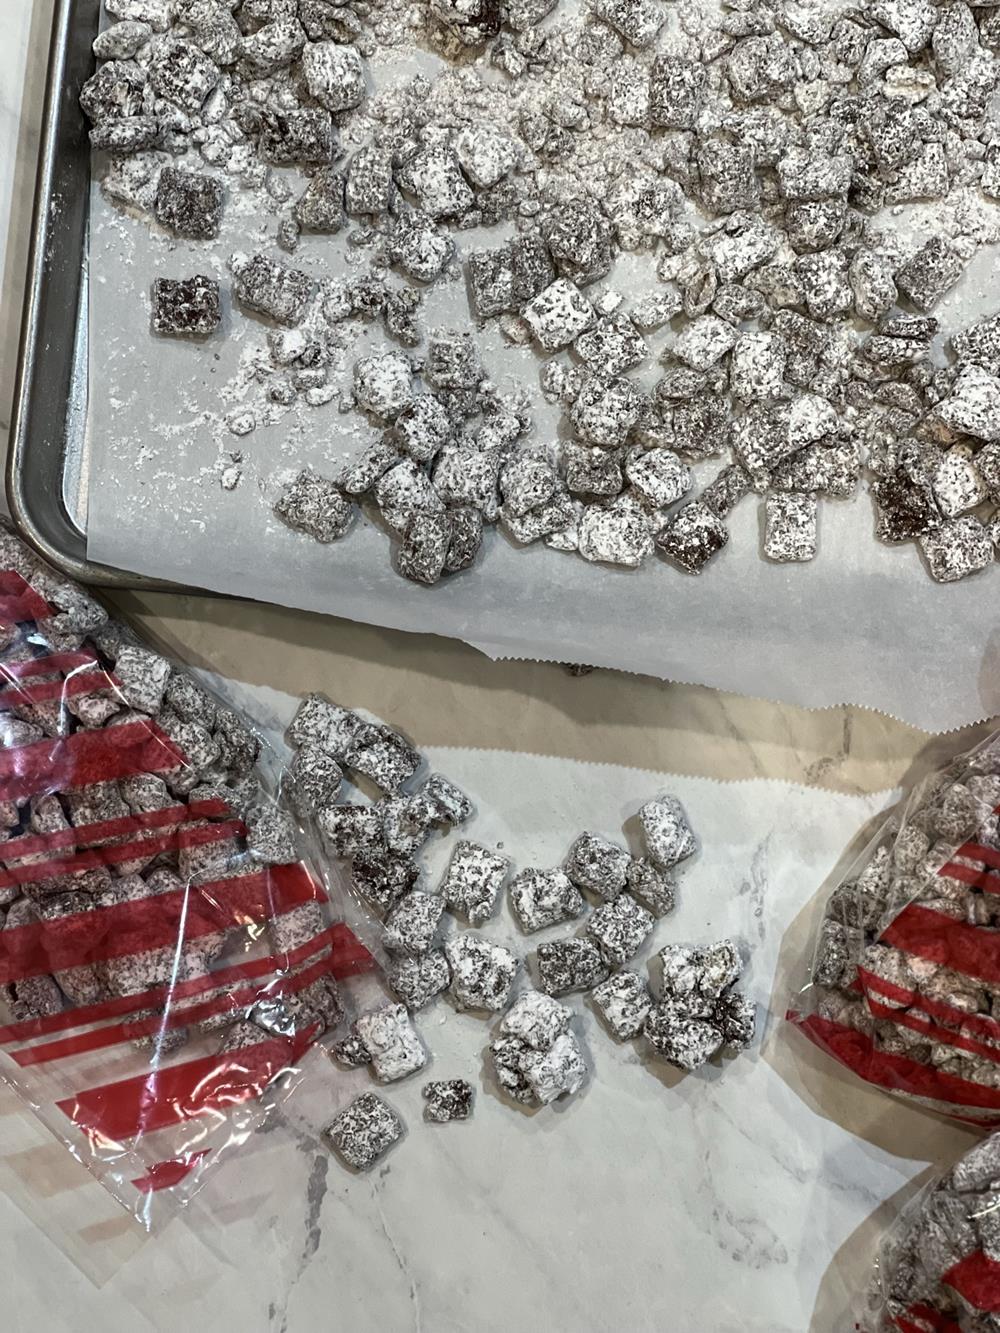 Chocolate Candy Cane Chex Mix on baking sheet with small bags in front